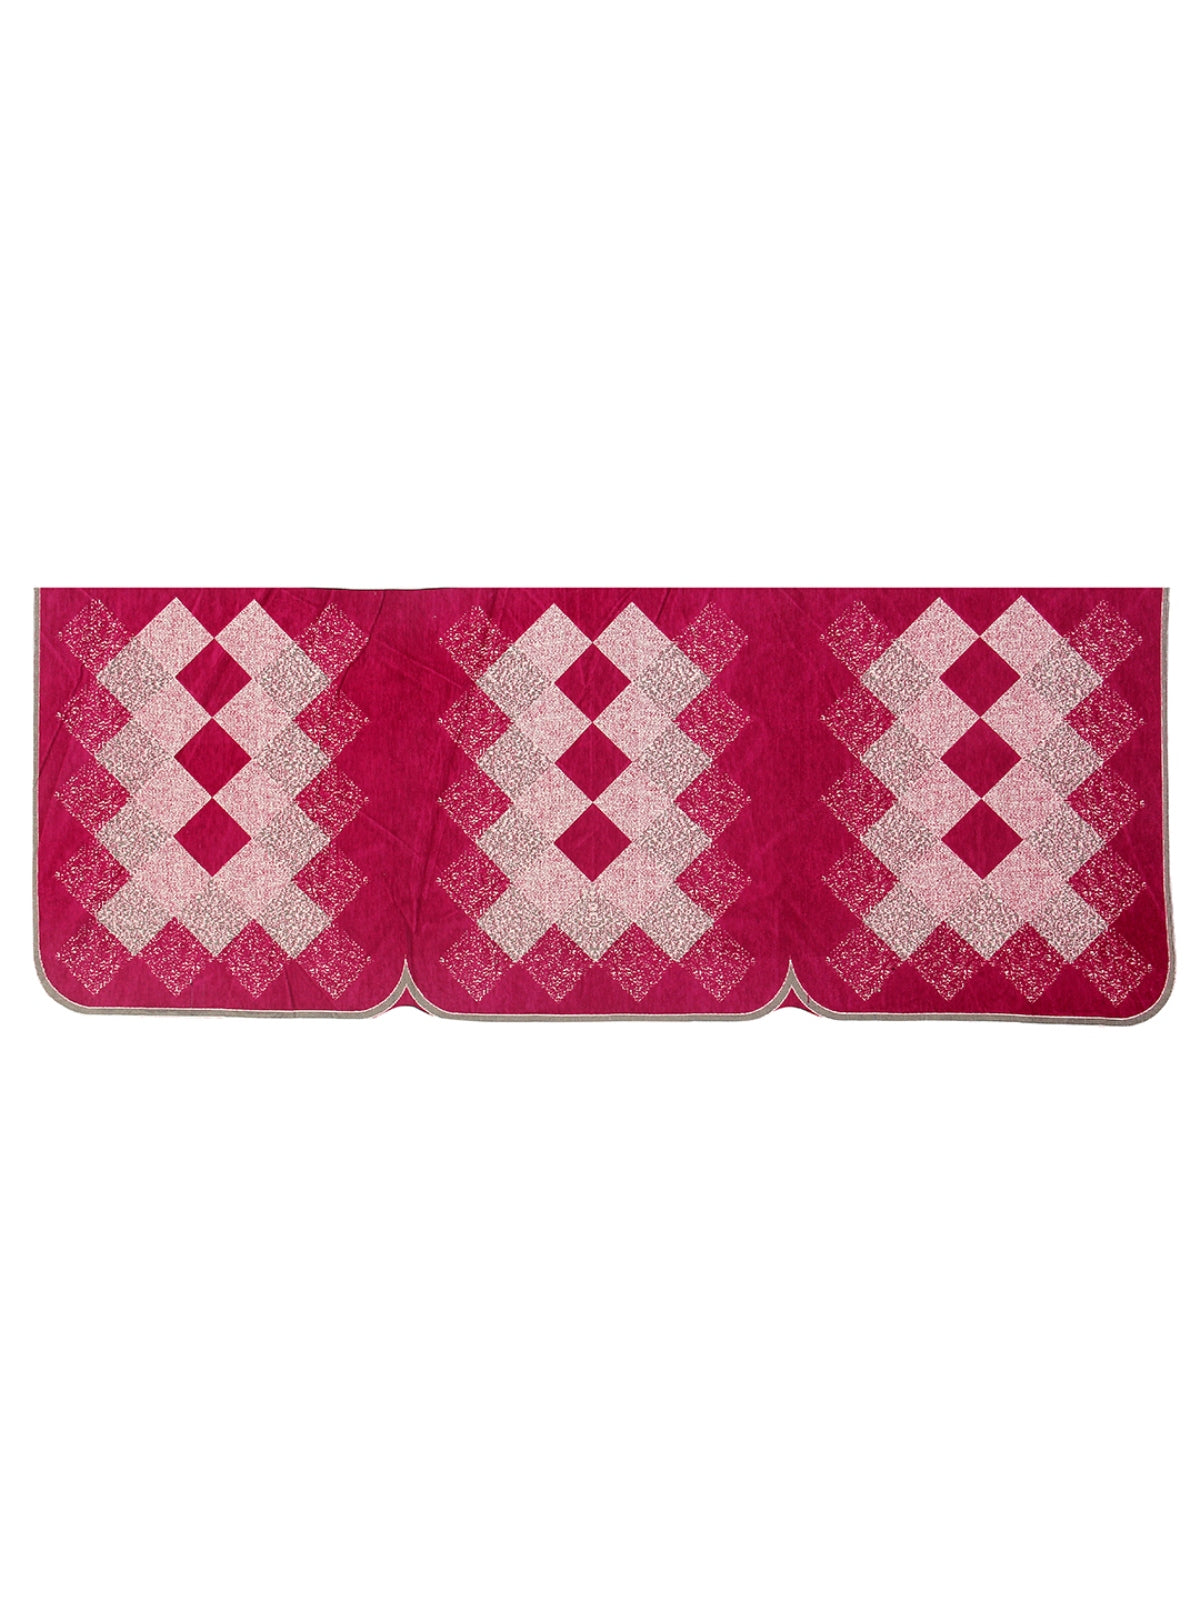 Pink Checks Patterned 5 Seater Sofa Cover Set with Arms Cover